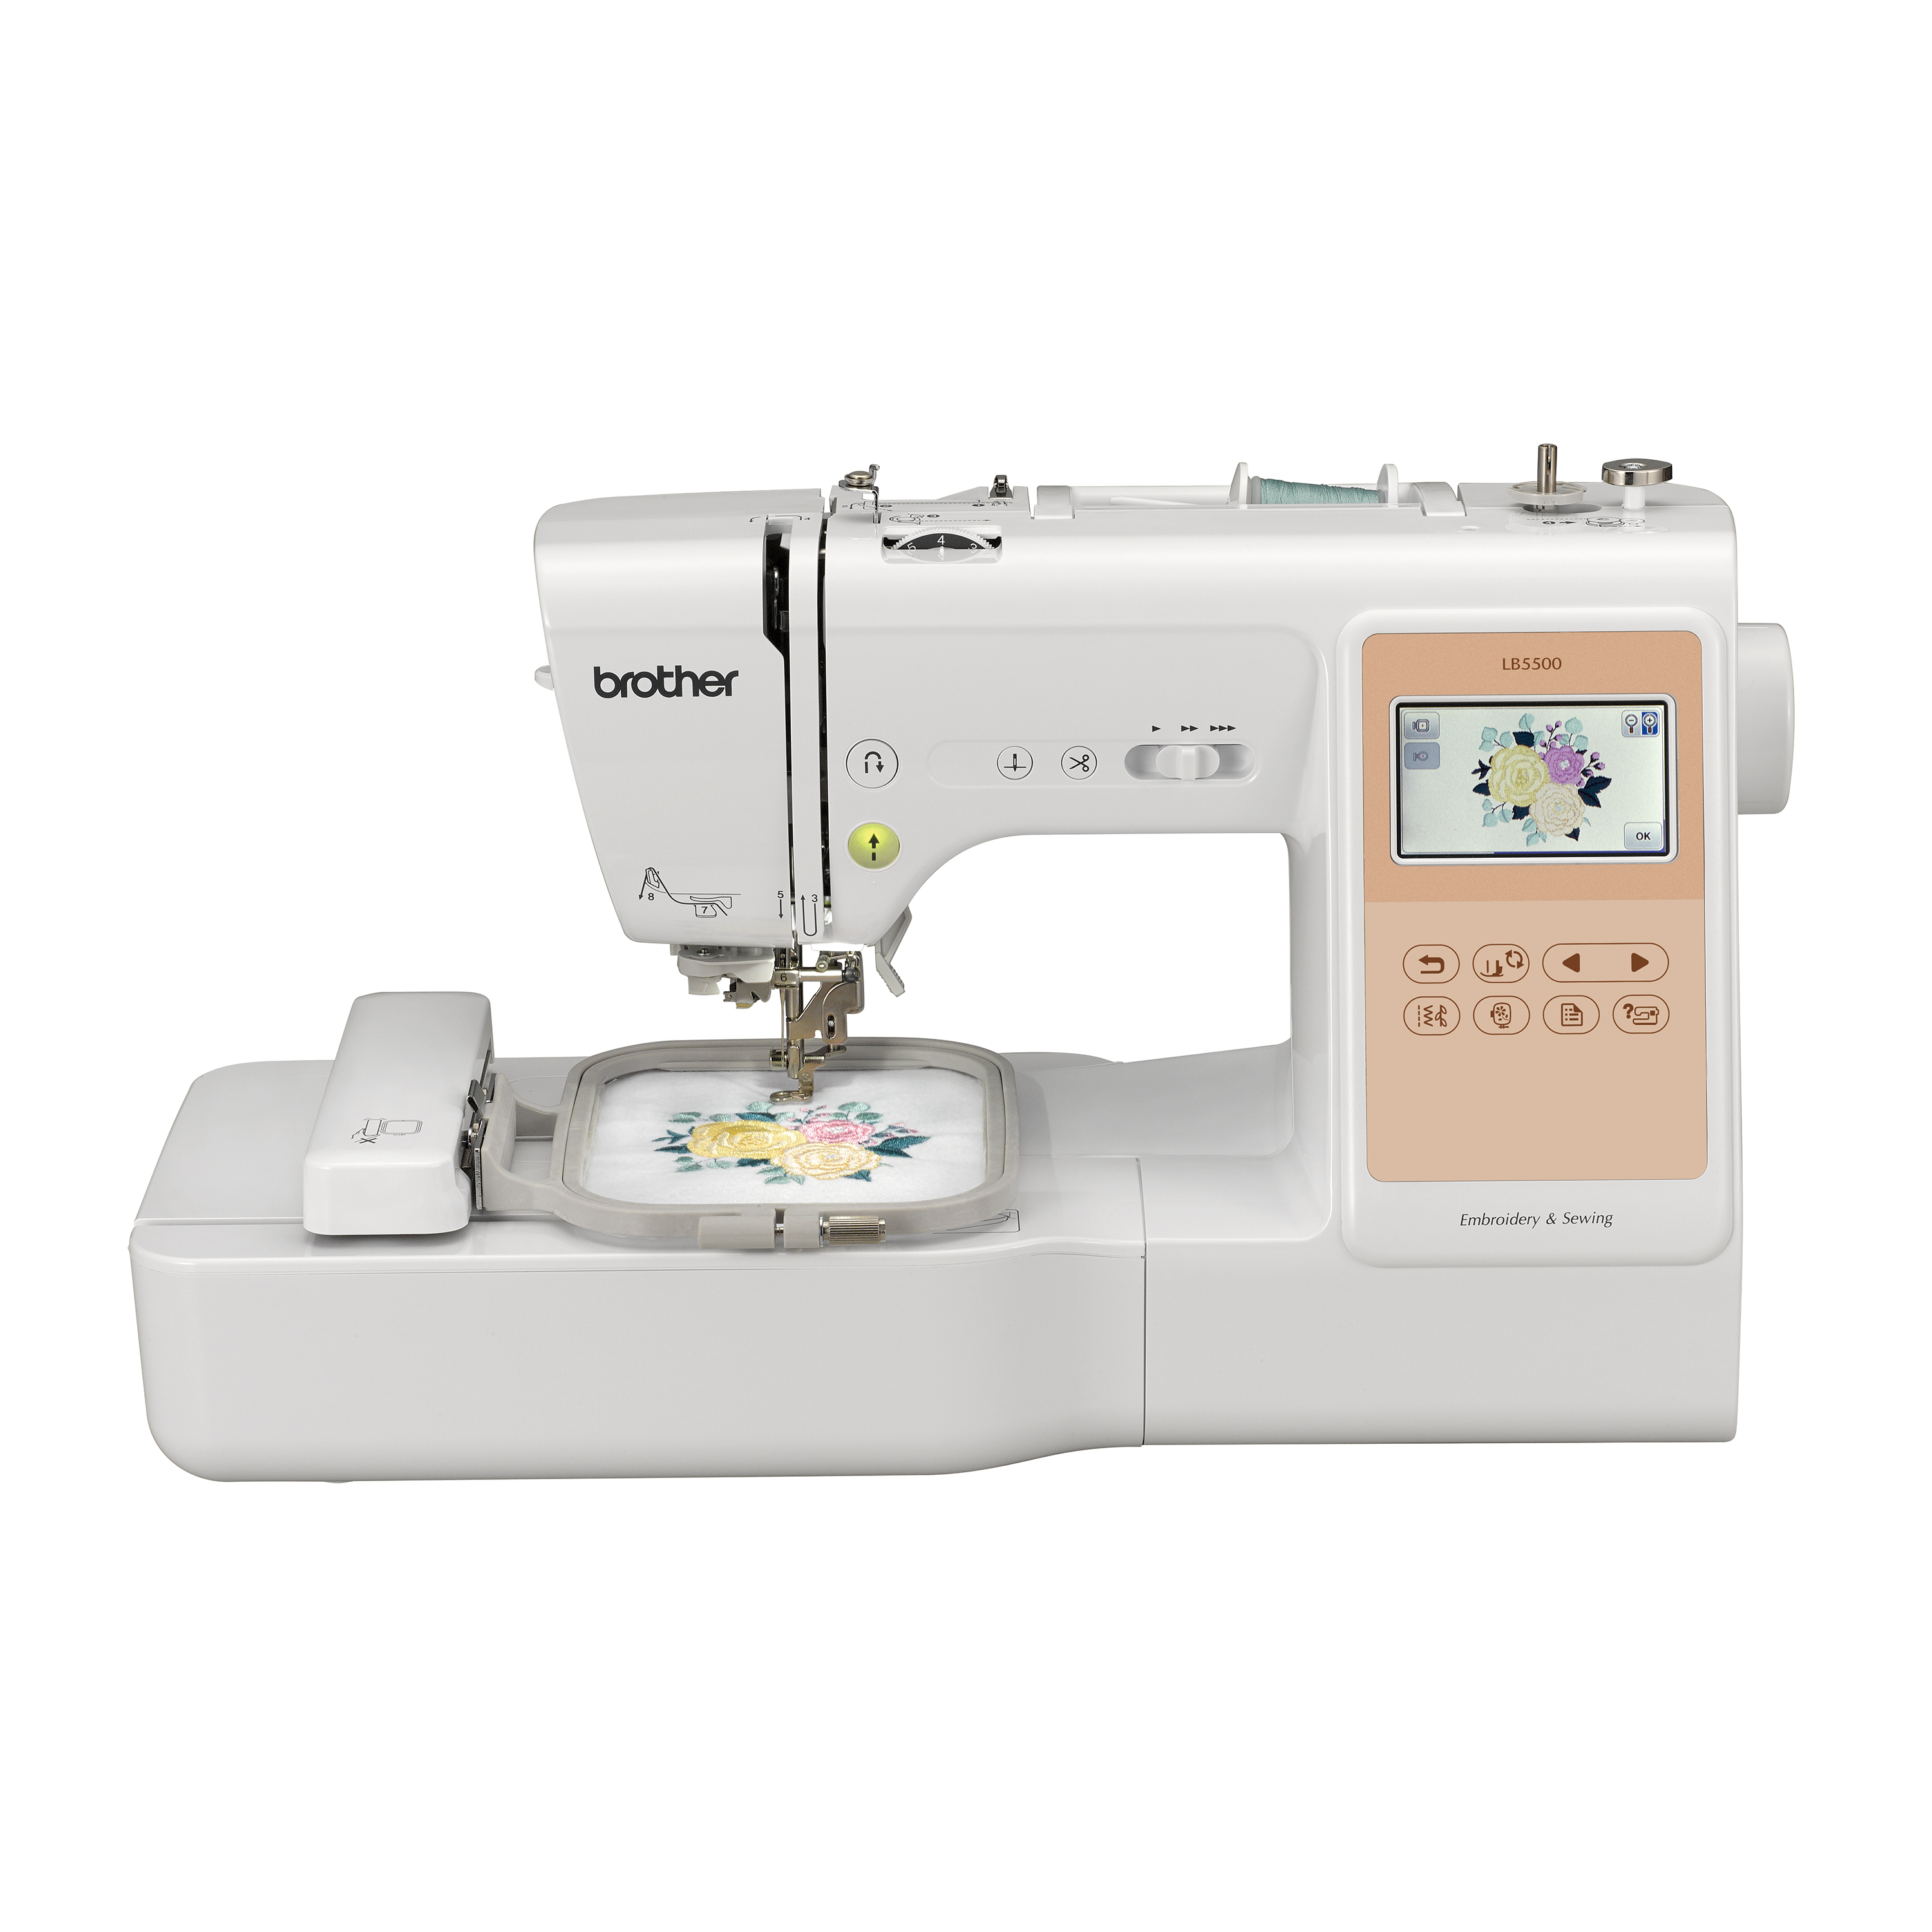 Artspira App Compatible Sewing and Embroidery Machines